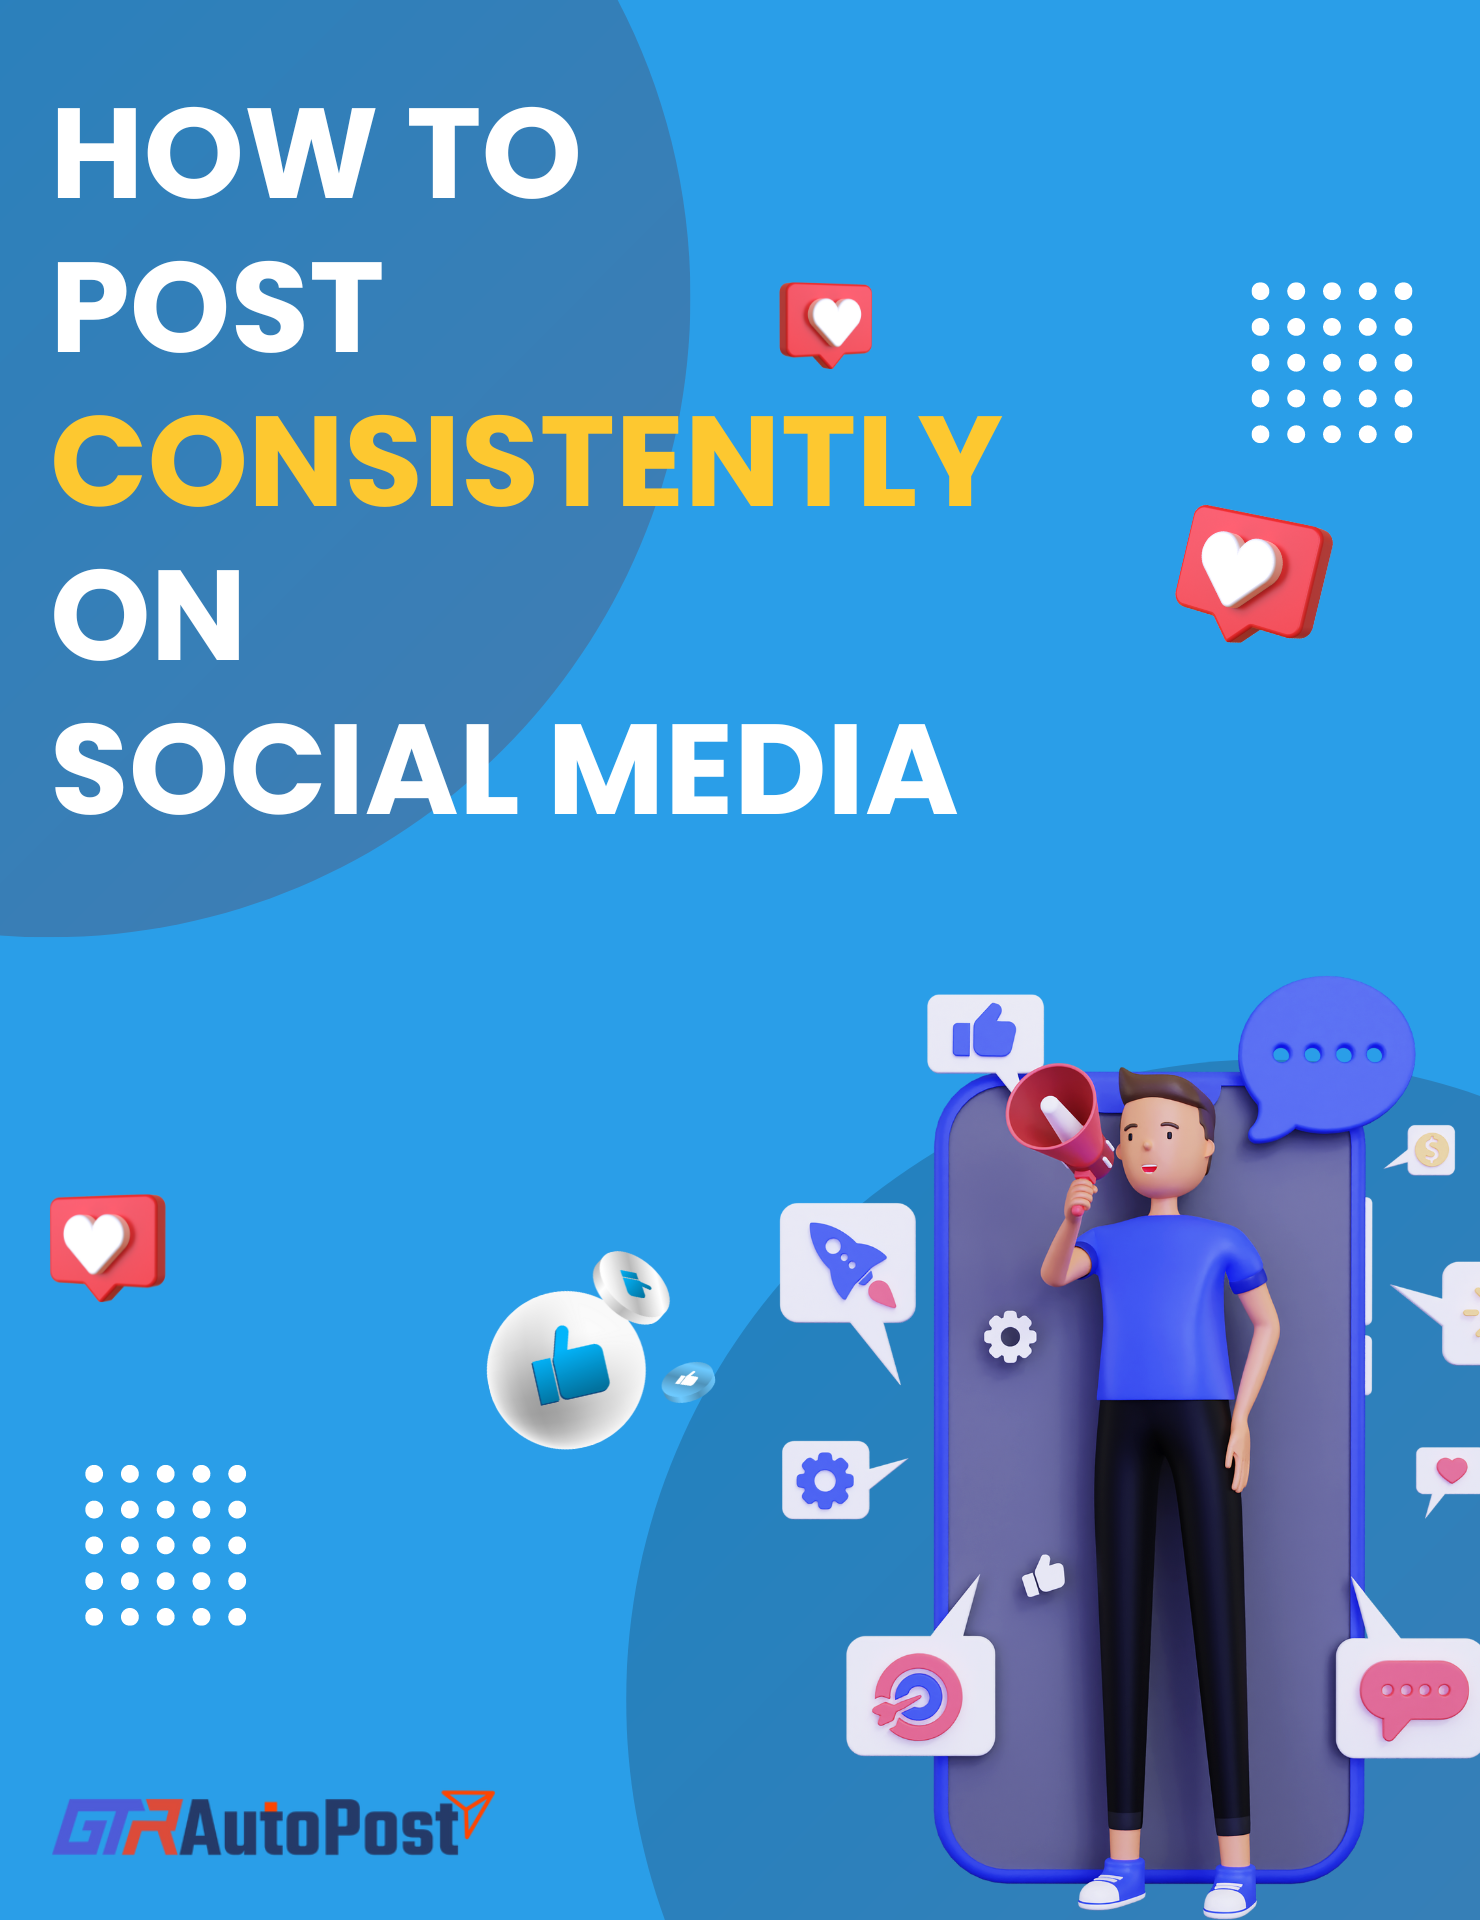 How to Post Consistently on Social Media